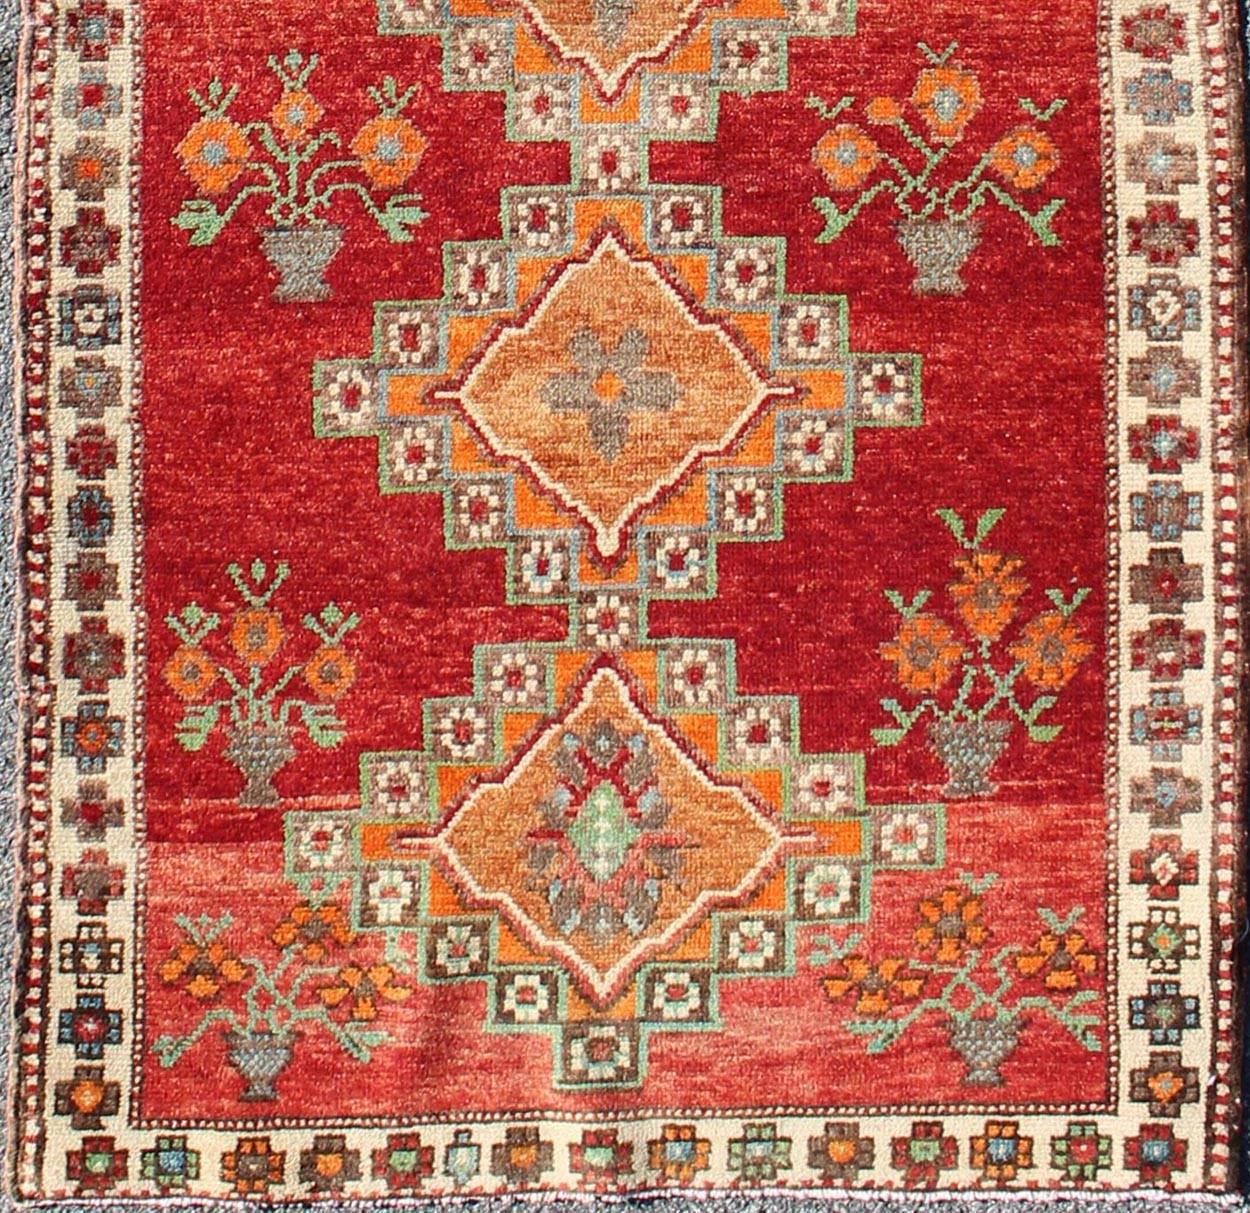 This vintage Oushak runner features a unique blend of cheerful colors and an intricately beautiful design. The multi-layered diamond medallions are complemented by a symmetrical set of floral motifs. The various shades of blue, green, and chocolate